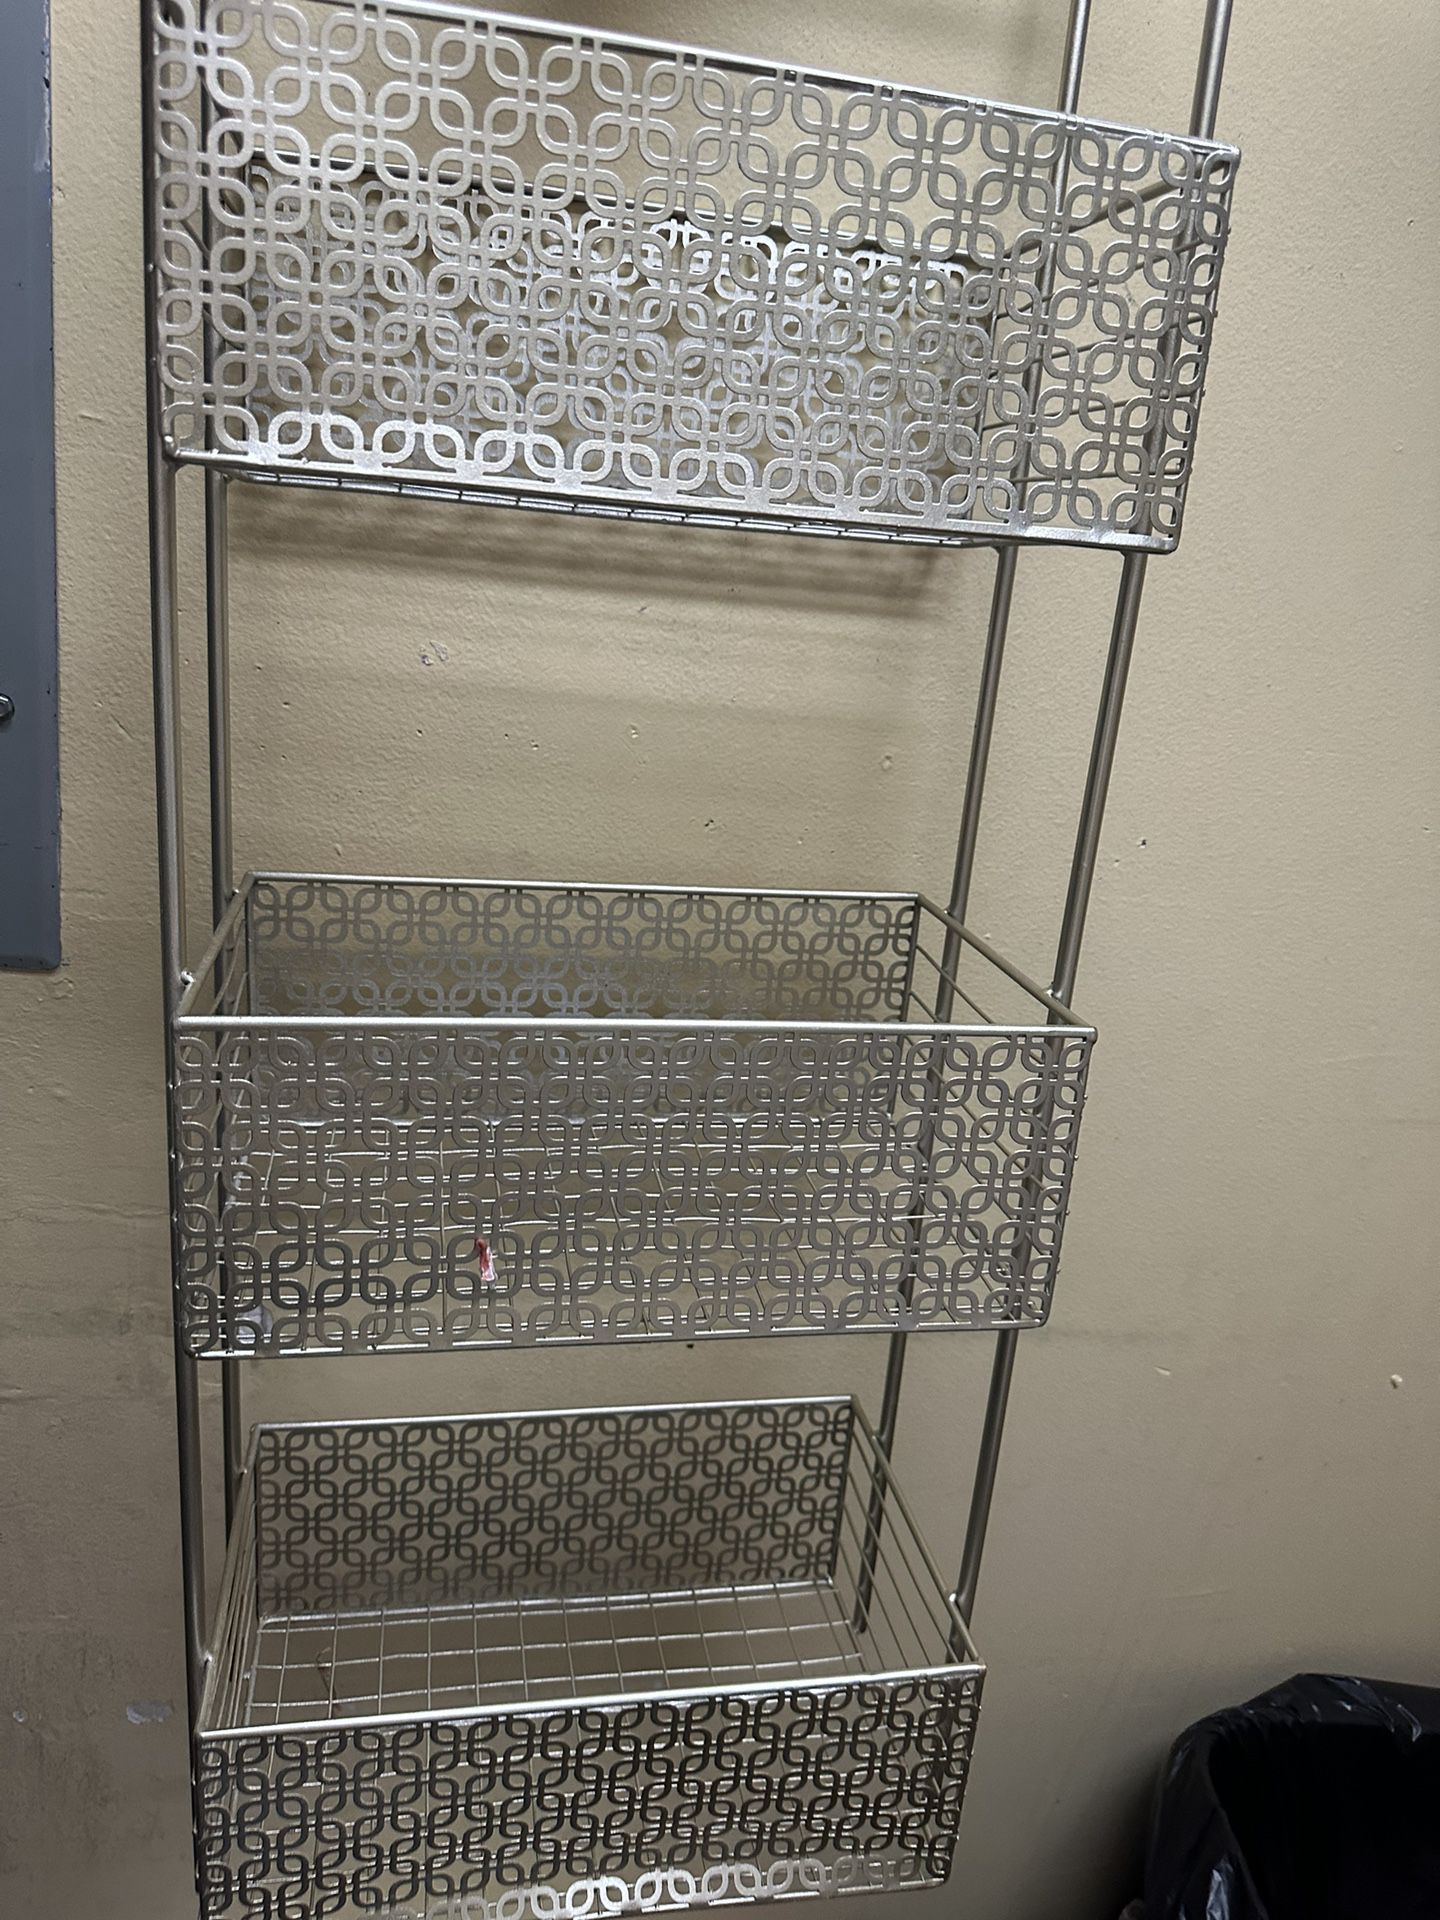 3 Tier Metal Stand Organizer With Baskets